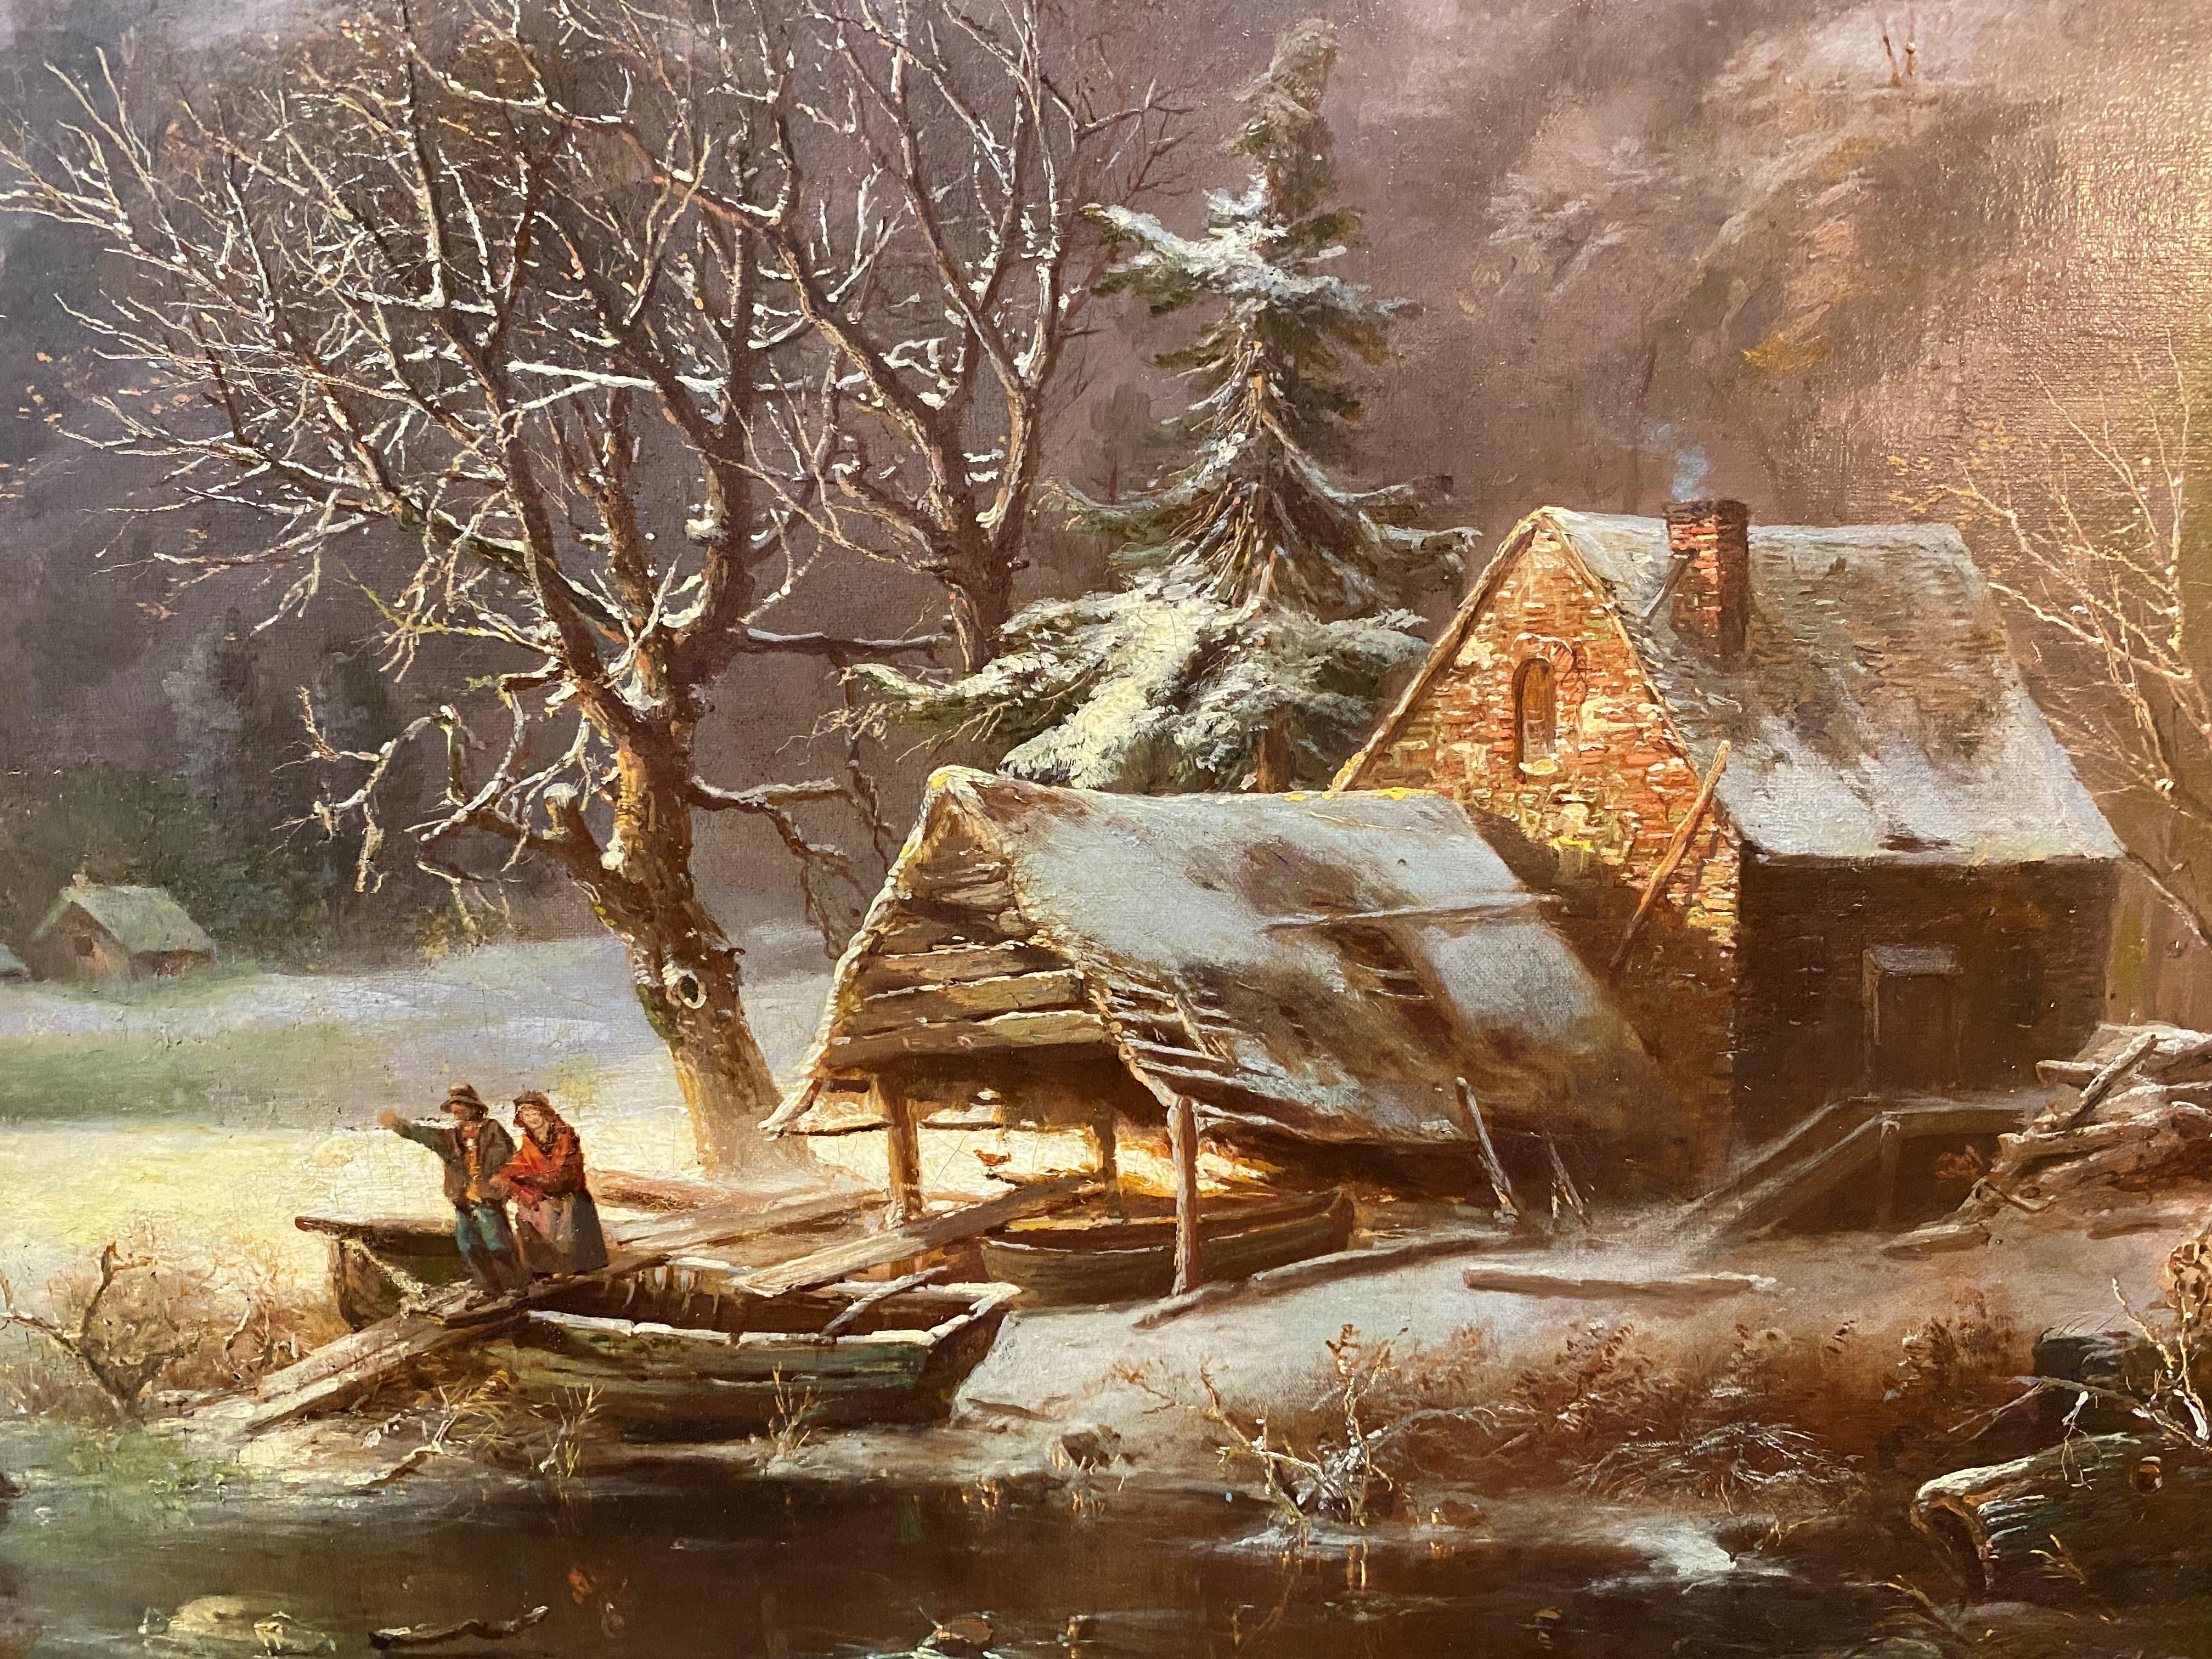 A fine winter landscape with a skating scene by French American artist Regis Francois Gignoux (1816-1882). Gignoux was born in Lyon, France, and began his studies in Fribourg, Switzerland and then at the St. Pierre Academie in Lyon, France, which